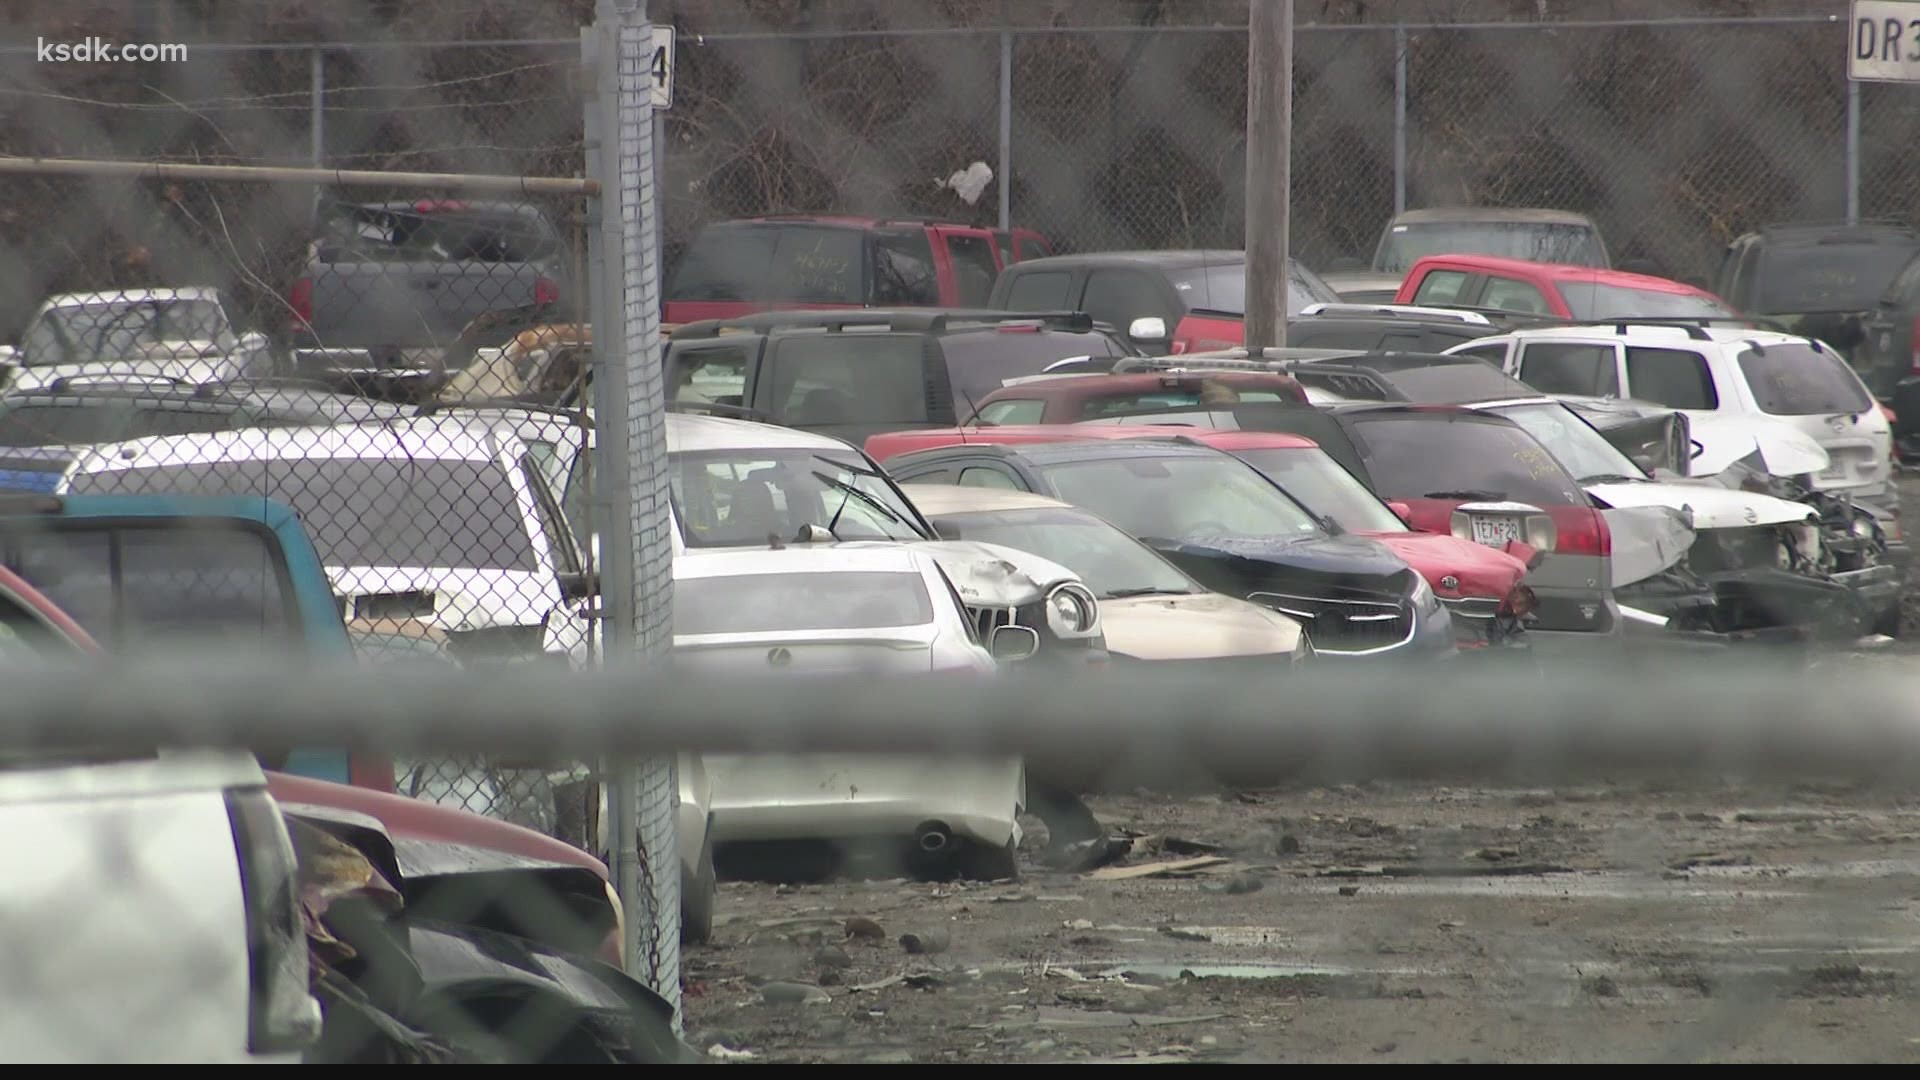 From missing cars to missing money, the I-Team has been uncovering serious issues at the city tow lot for months. Now a group of Aldermen is taking notice.